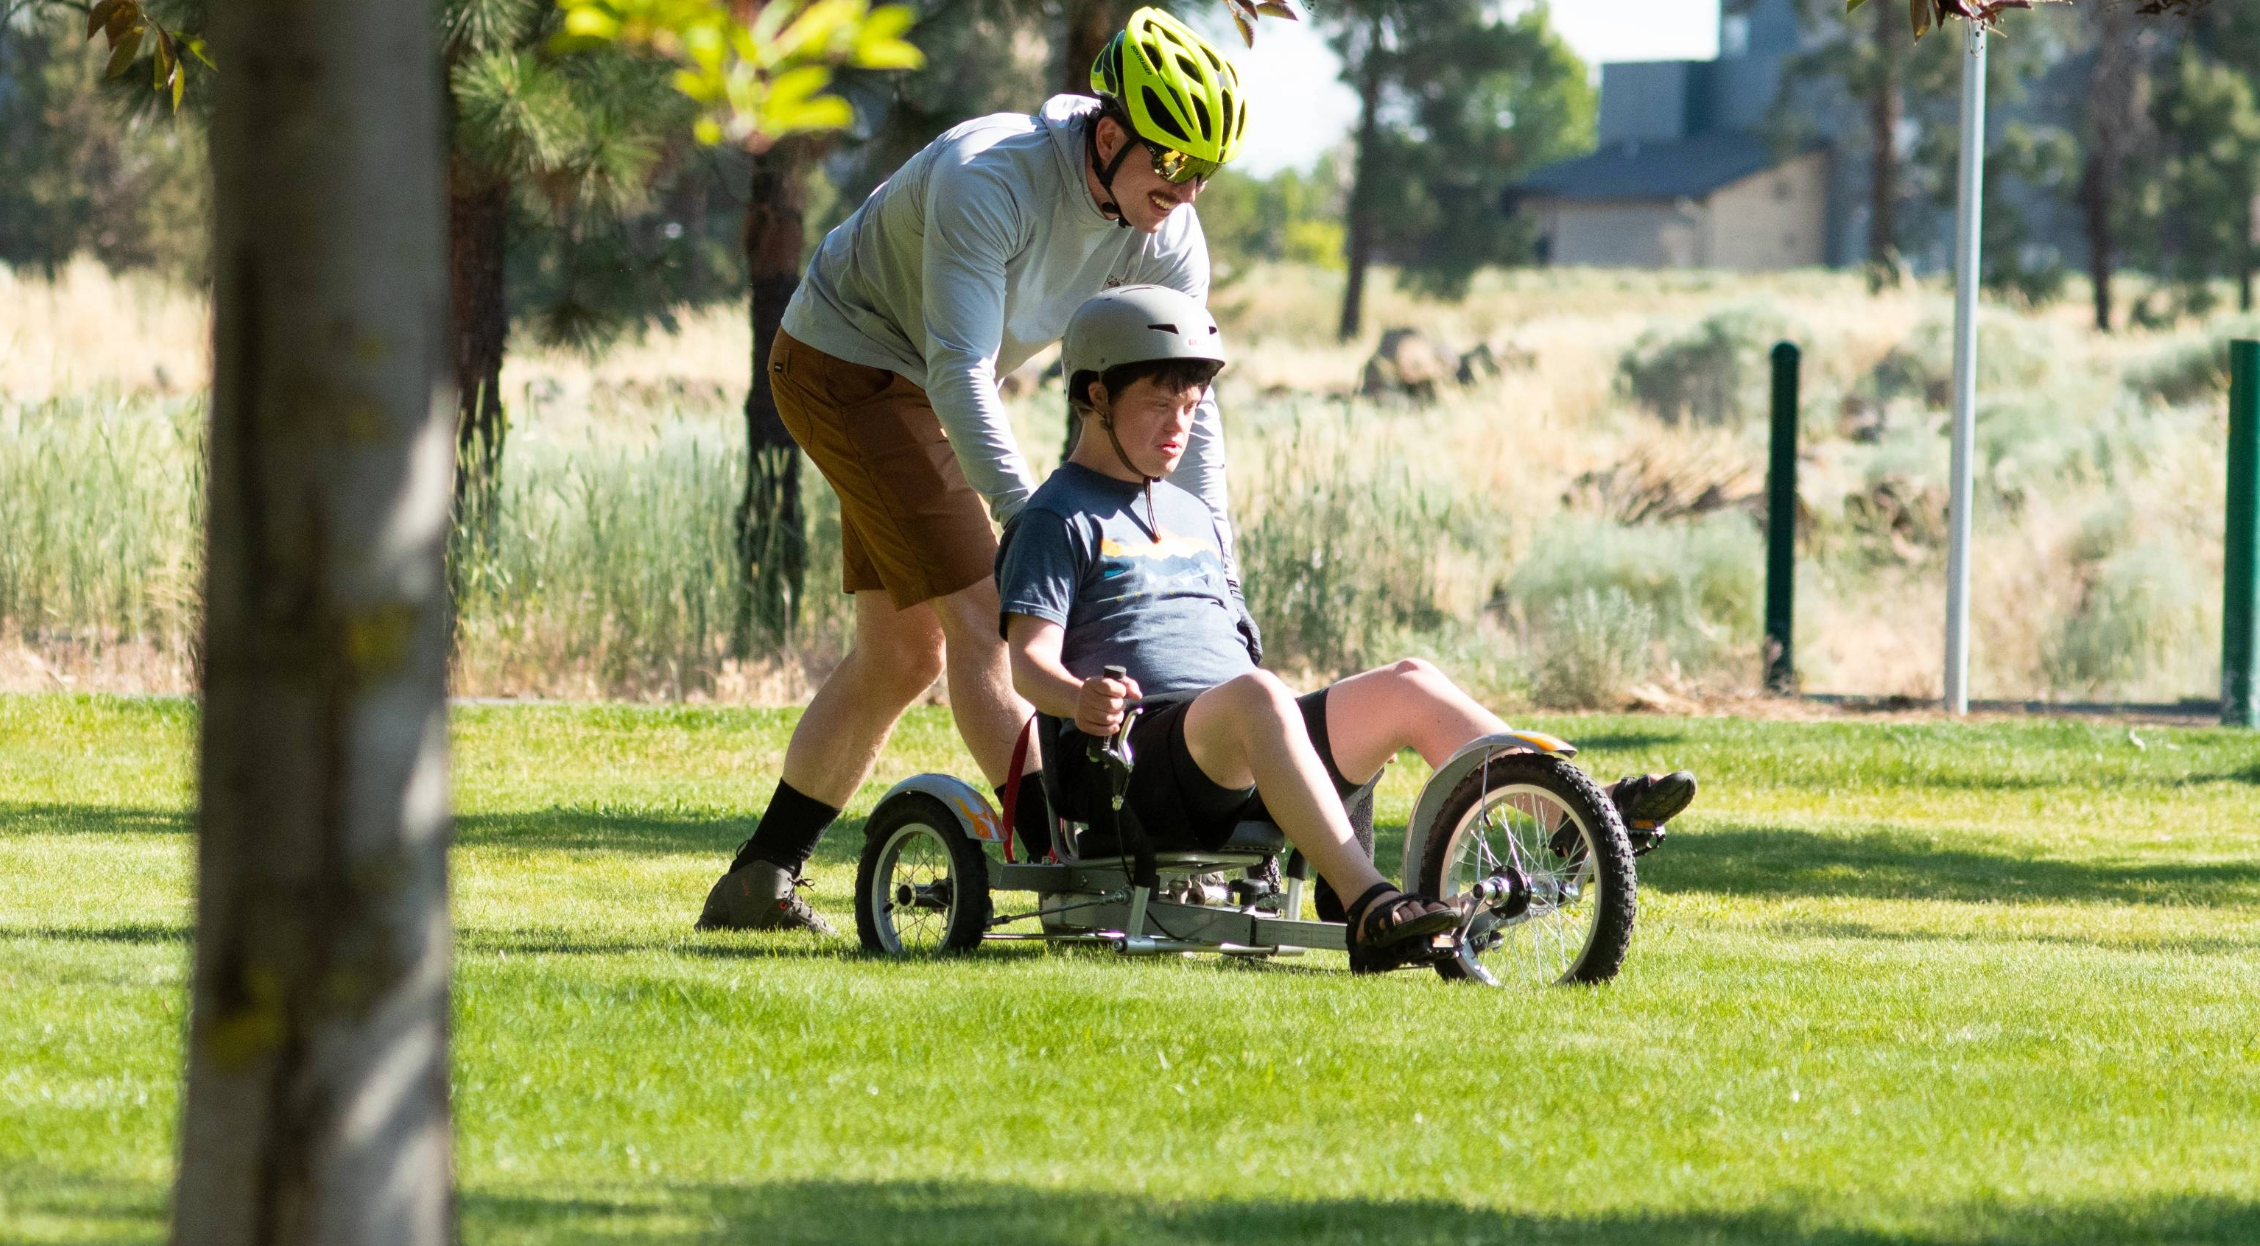 OAS volunteer in a green helmet supports a young adaptive athlete in a recumbent bike. bright green grass and greenery around them.